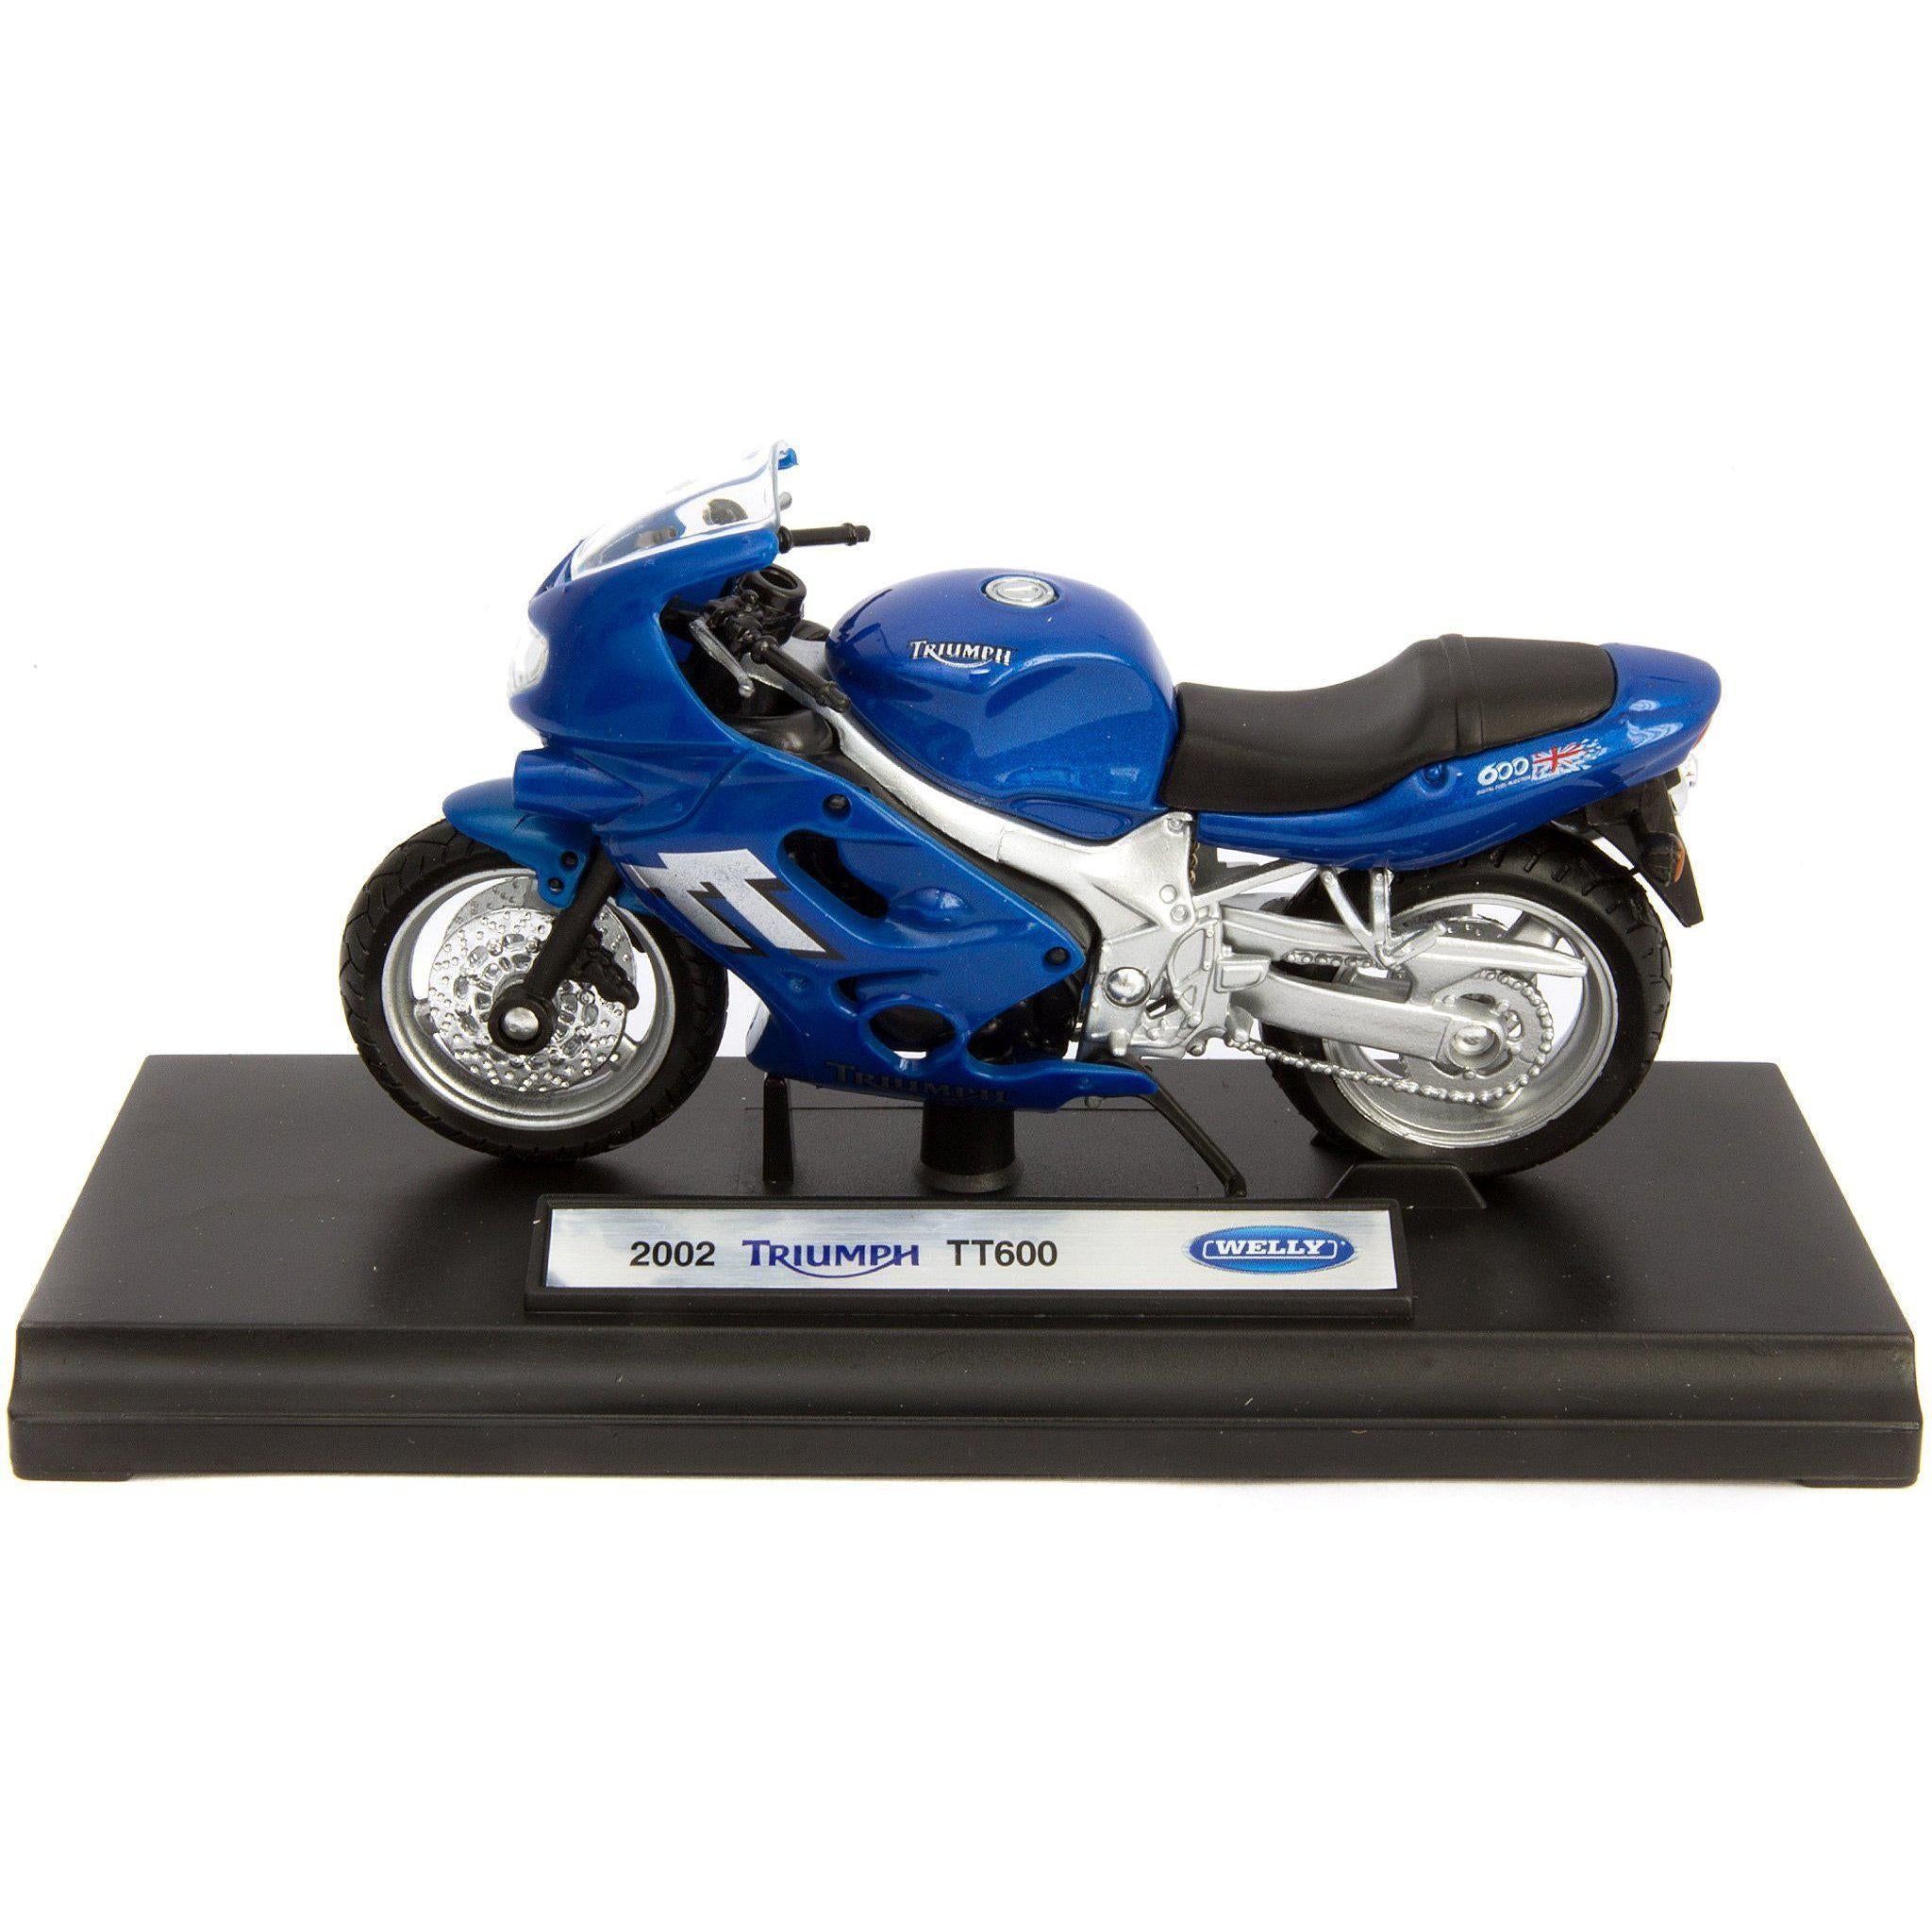 Triumph TT600 Diecast Model Motorcycle 2002 - 1:18 Scale-Welly-Diecast Model Centre